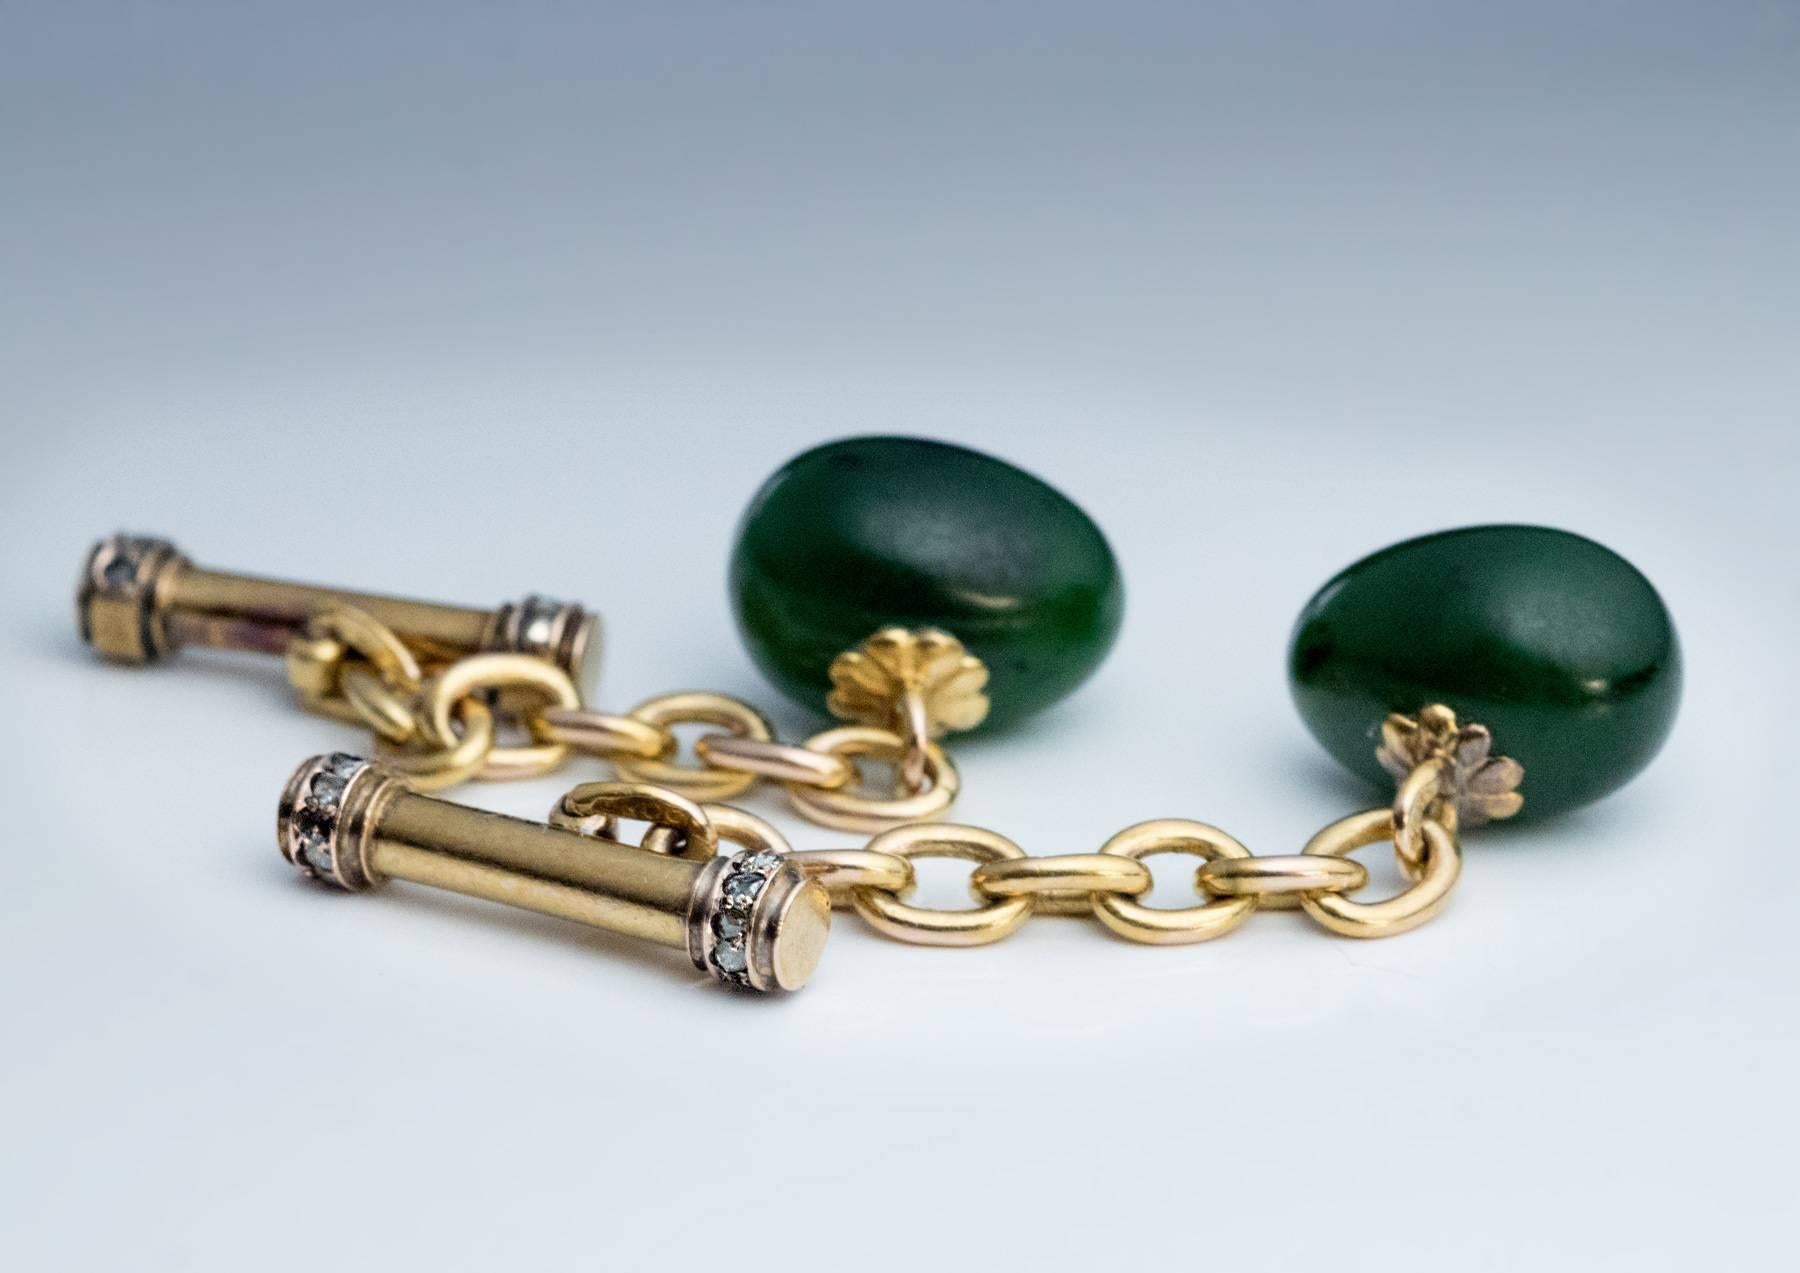 Made in St. Petersburg between 1899 and 1901.
A pair of rare pre-1917  Carl Faberge egg-shaped carved nephrite jade, gold and rose cut diamond cufflinks. The cufflinks are marked with 56 zolotnik old Russian gold standard (14K) with initials ‘ЯЛ’ of